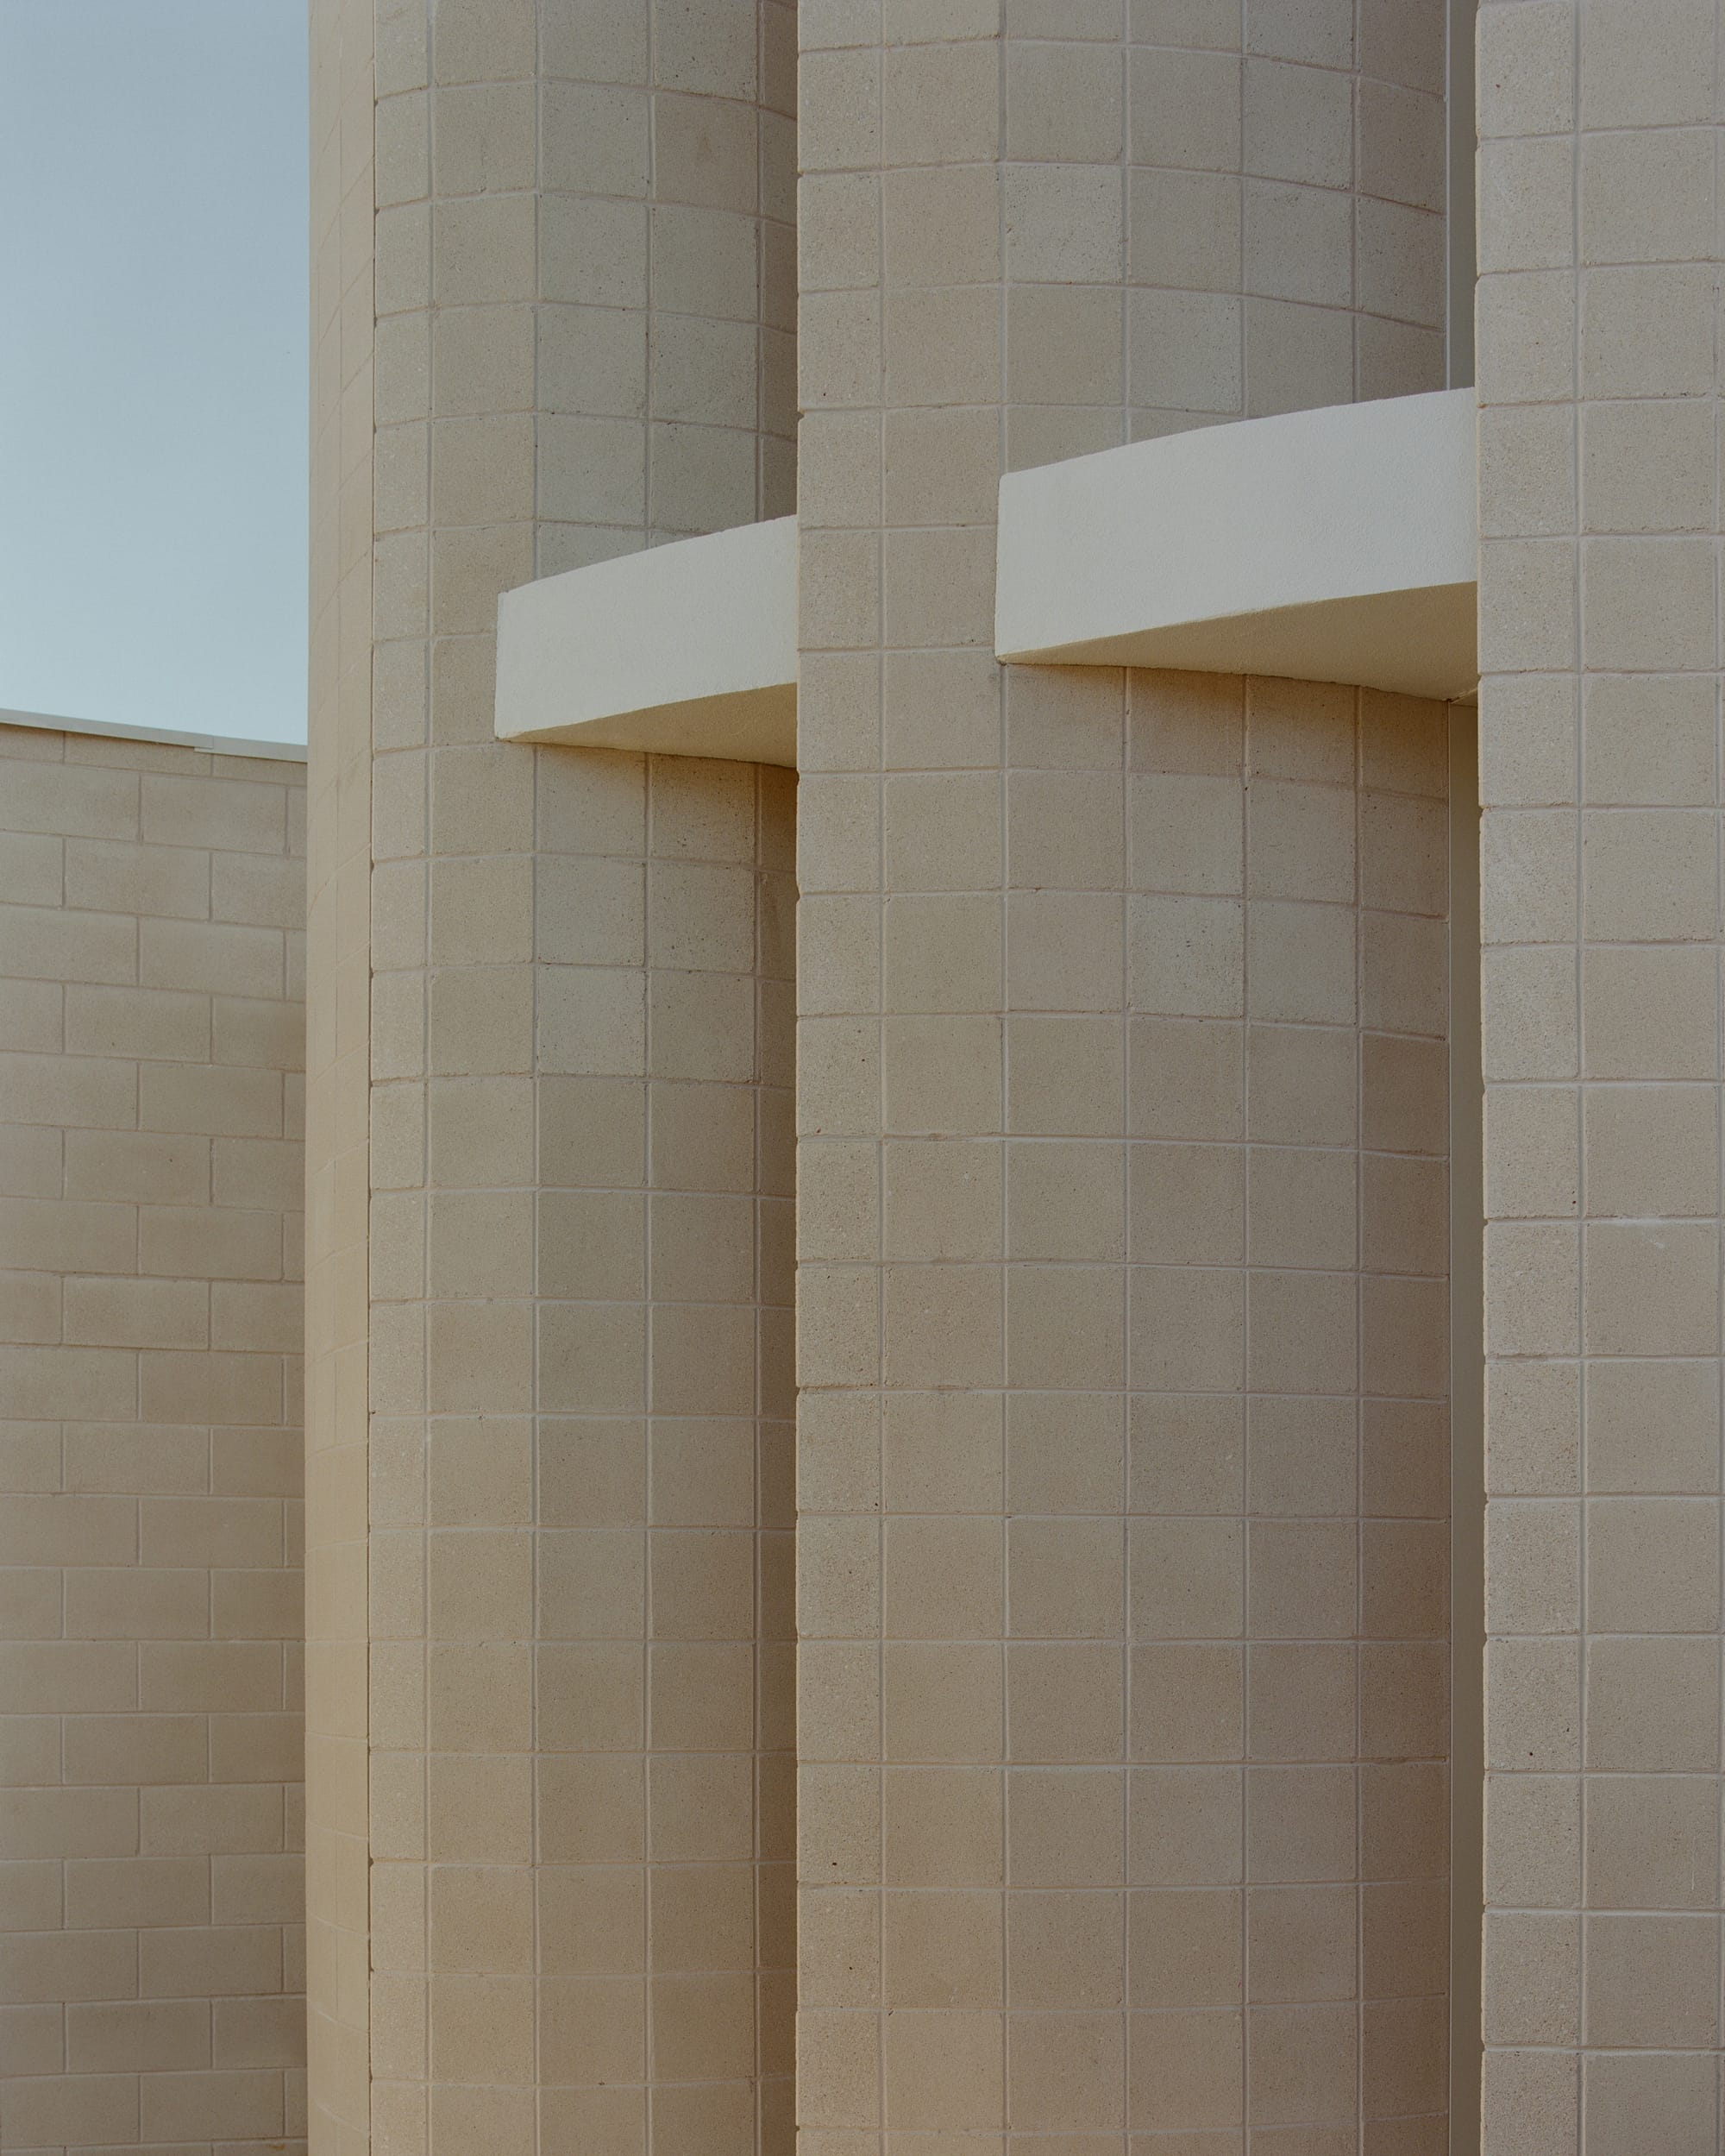 The photo captures a detail of the building's exterior, showing the texture of the beige bricks and two rectangular white ledges against a clear sky.